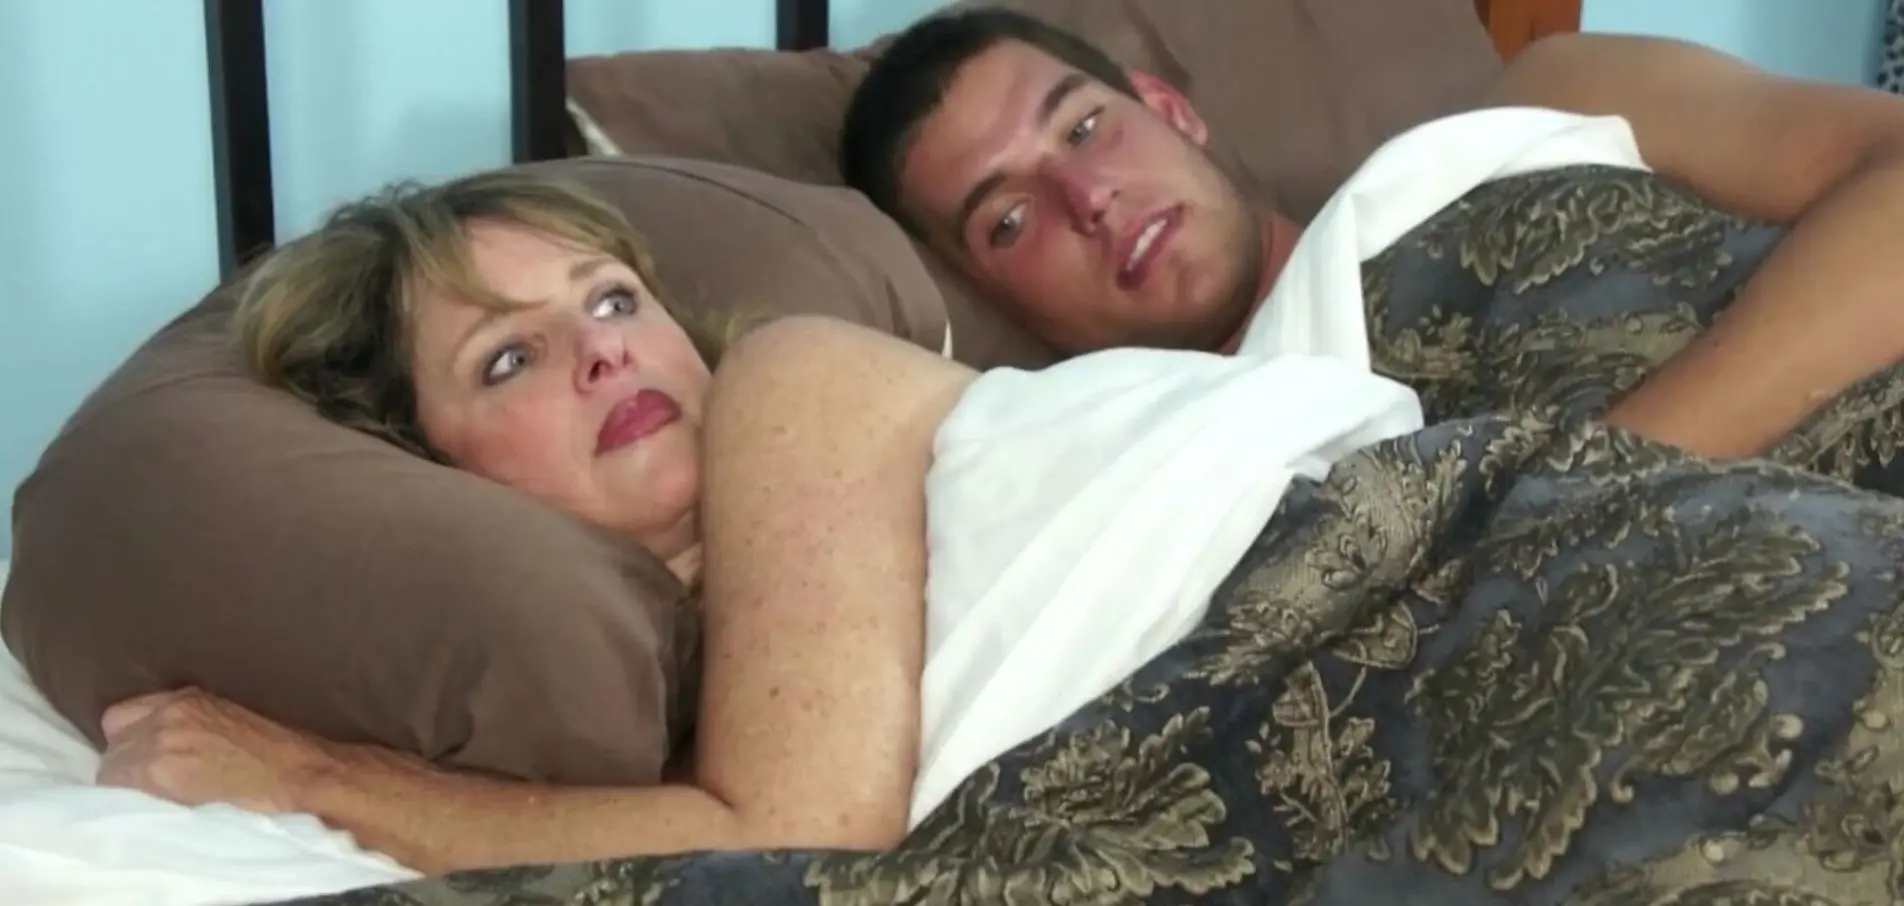 Sweet blonde mommy was awoken for quick sex by her randy stepson